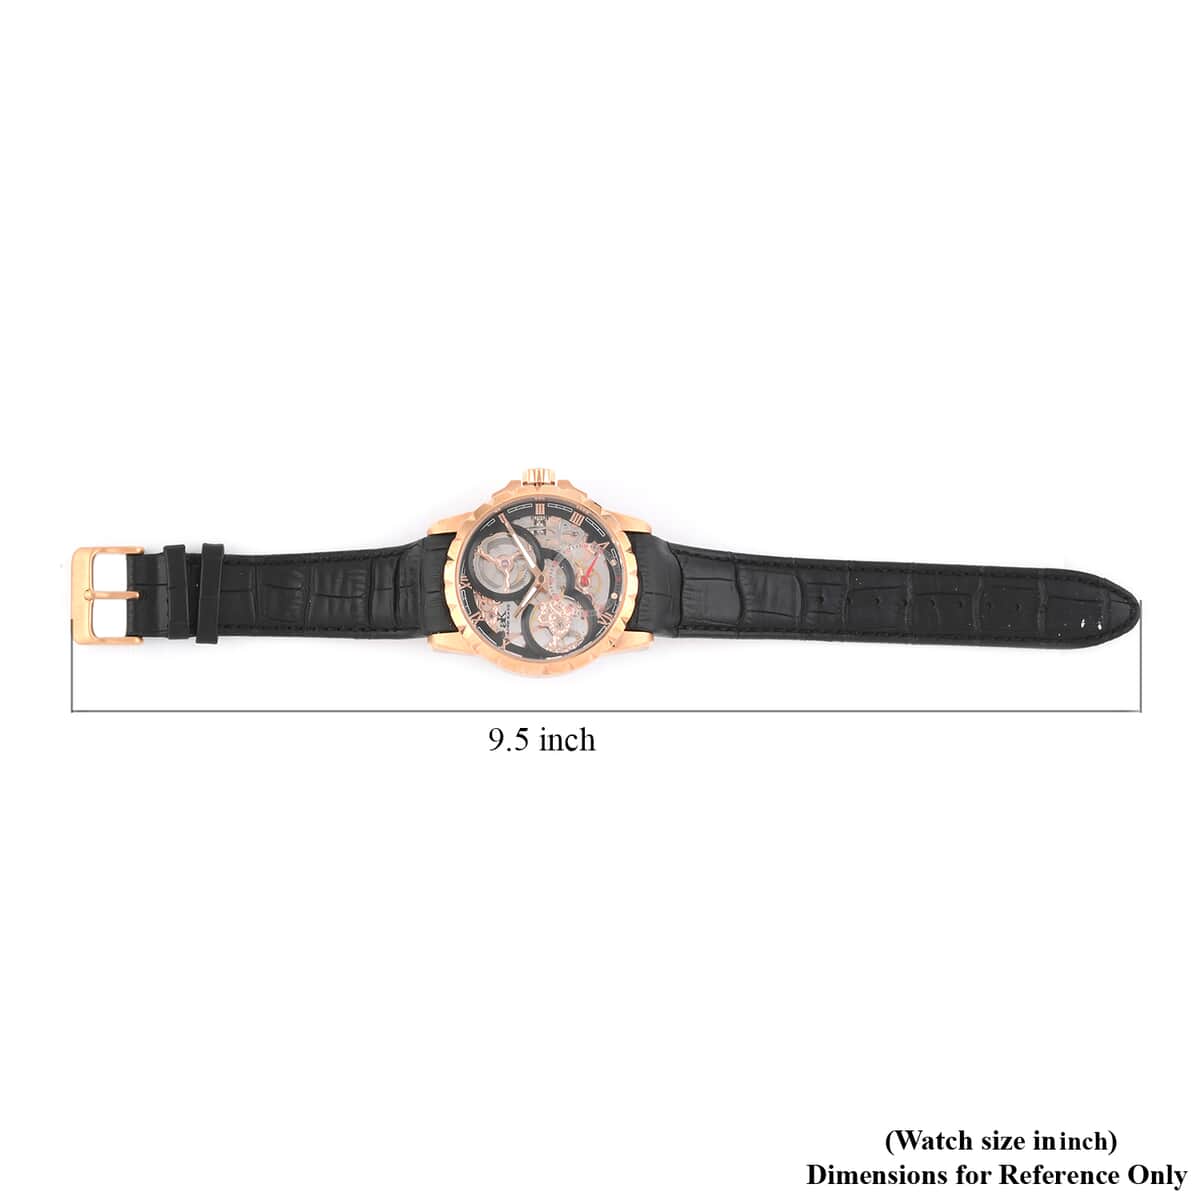 ADEE KAYE La Gear Mechanical Movement Watch with Genuine Leather Strap in Black (48mm) image number 5